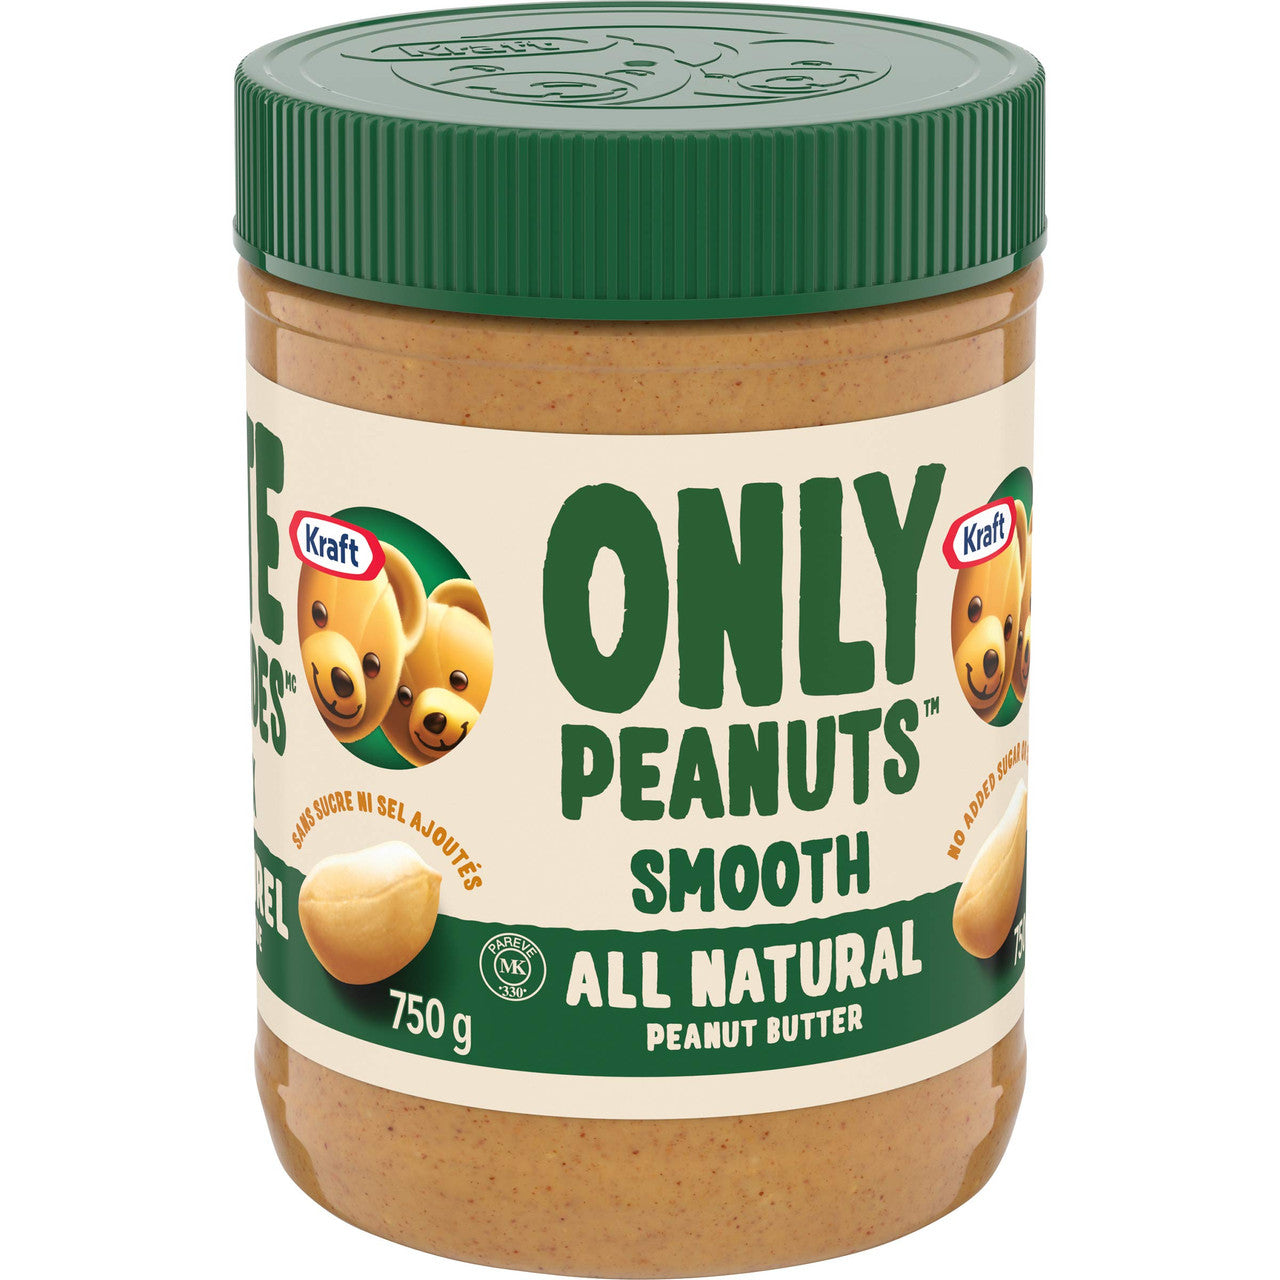 Kraft Peanut Butter Smooth 10kg/22.05 Pounds {Imported from Canada}